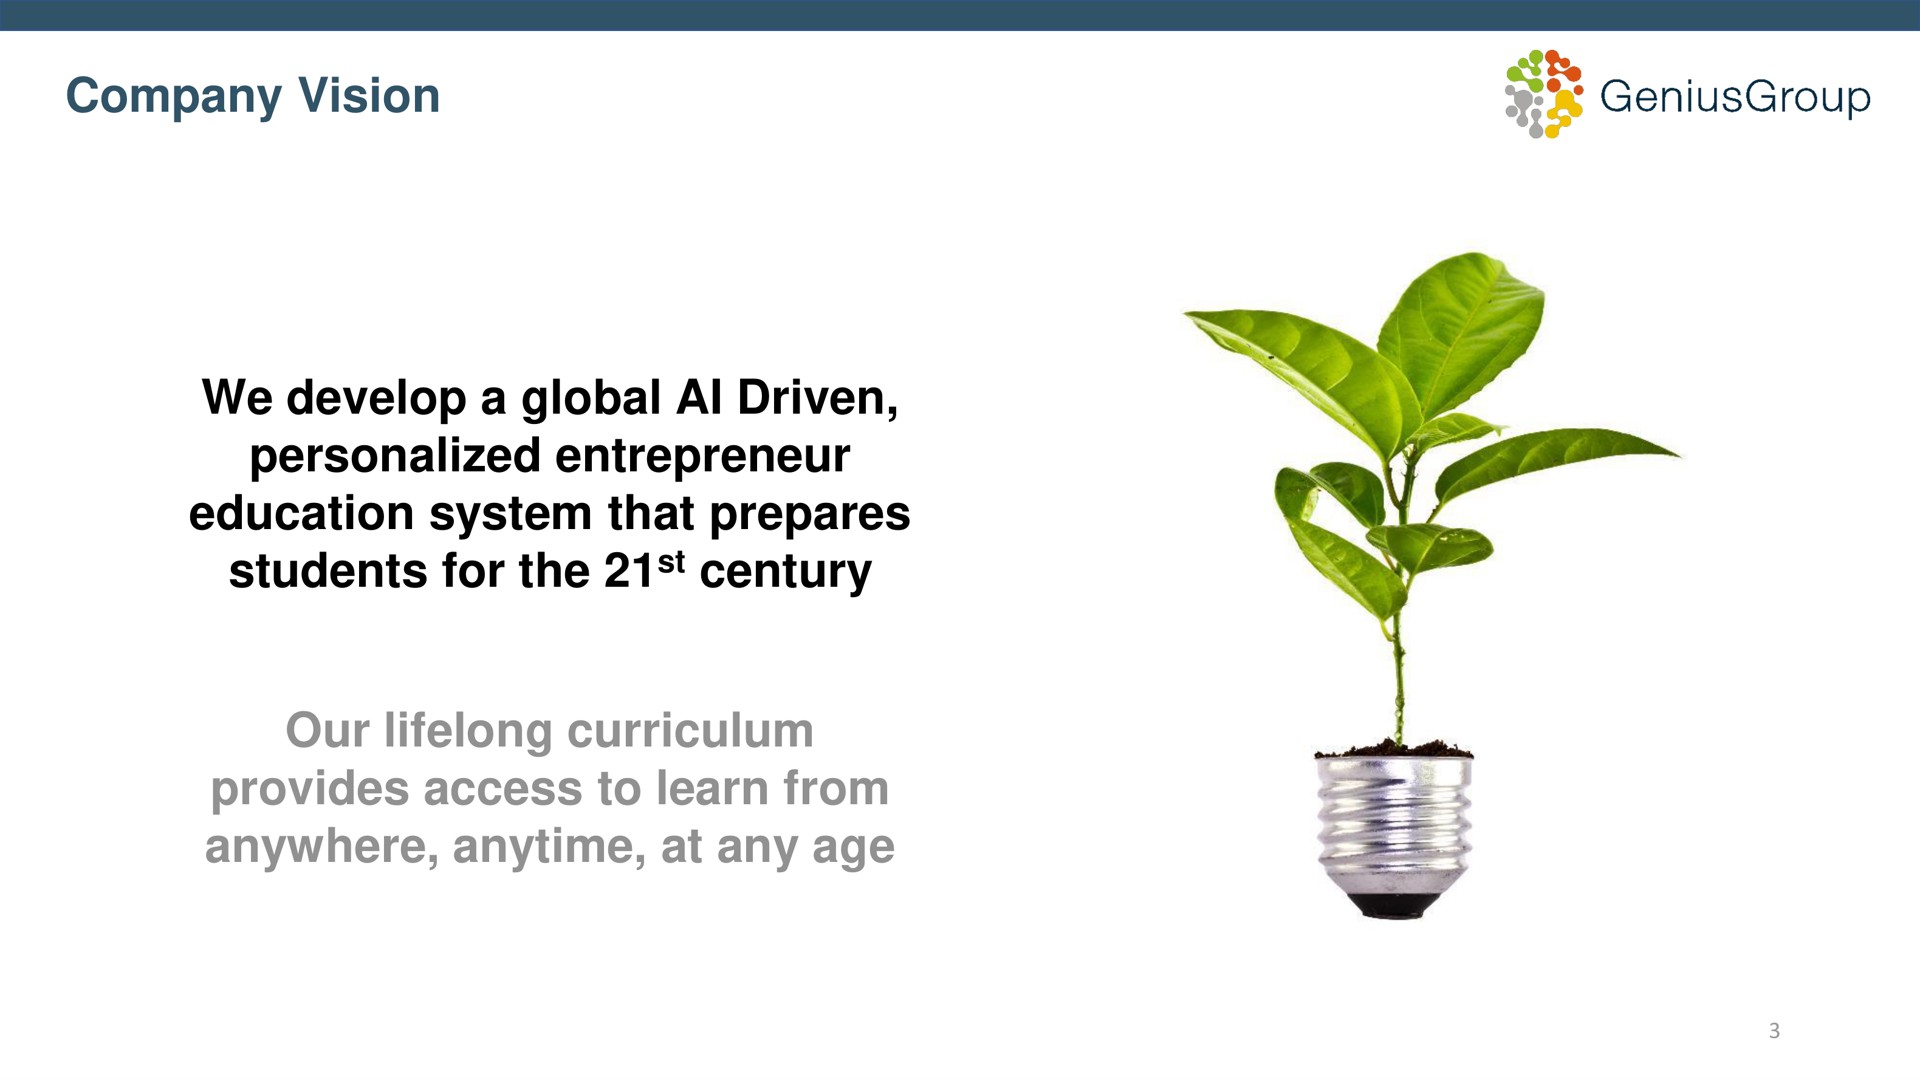 company vision we develop a global driven personalized entrepreneur education system that prepares students for the century our lifelong curriculum provides access to learn from anywhere at any age | Genius Group